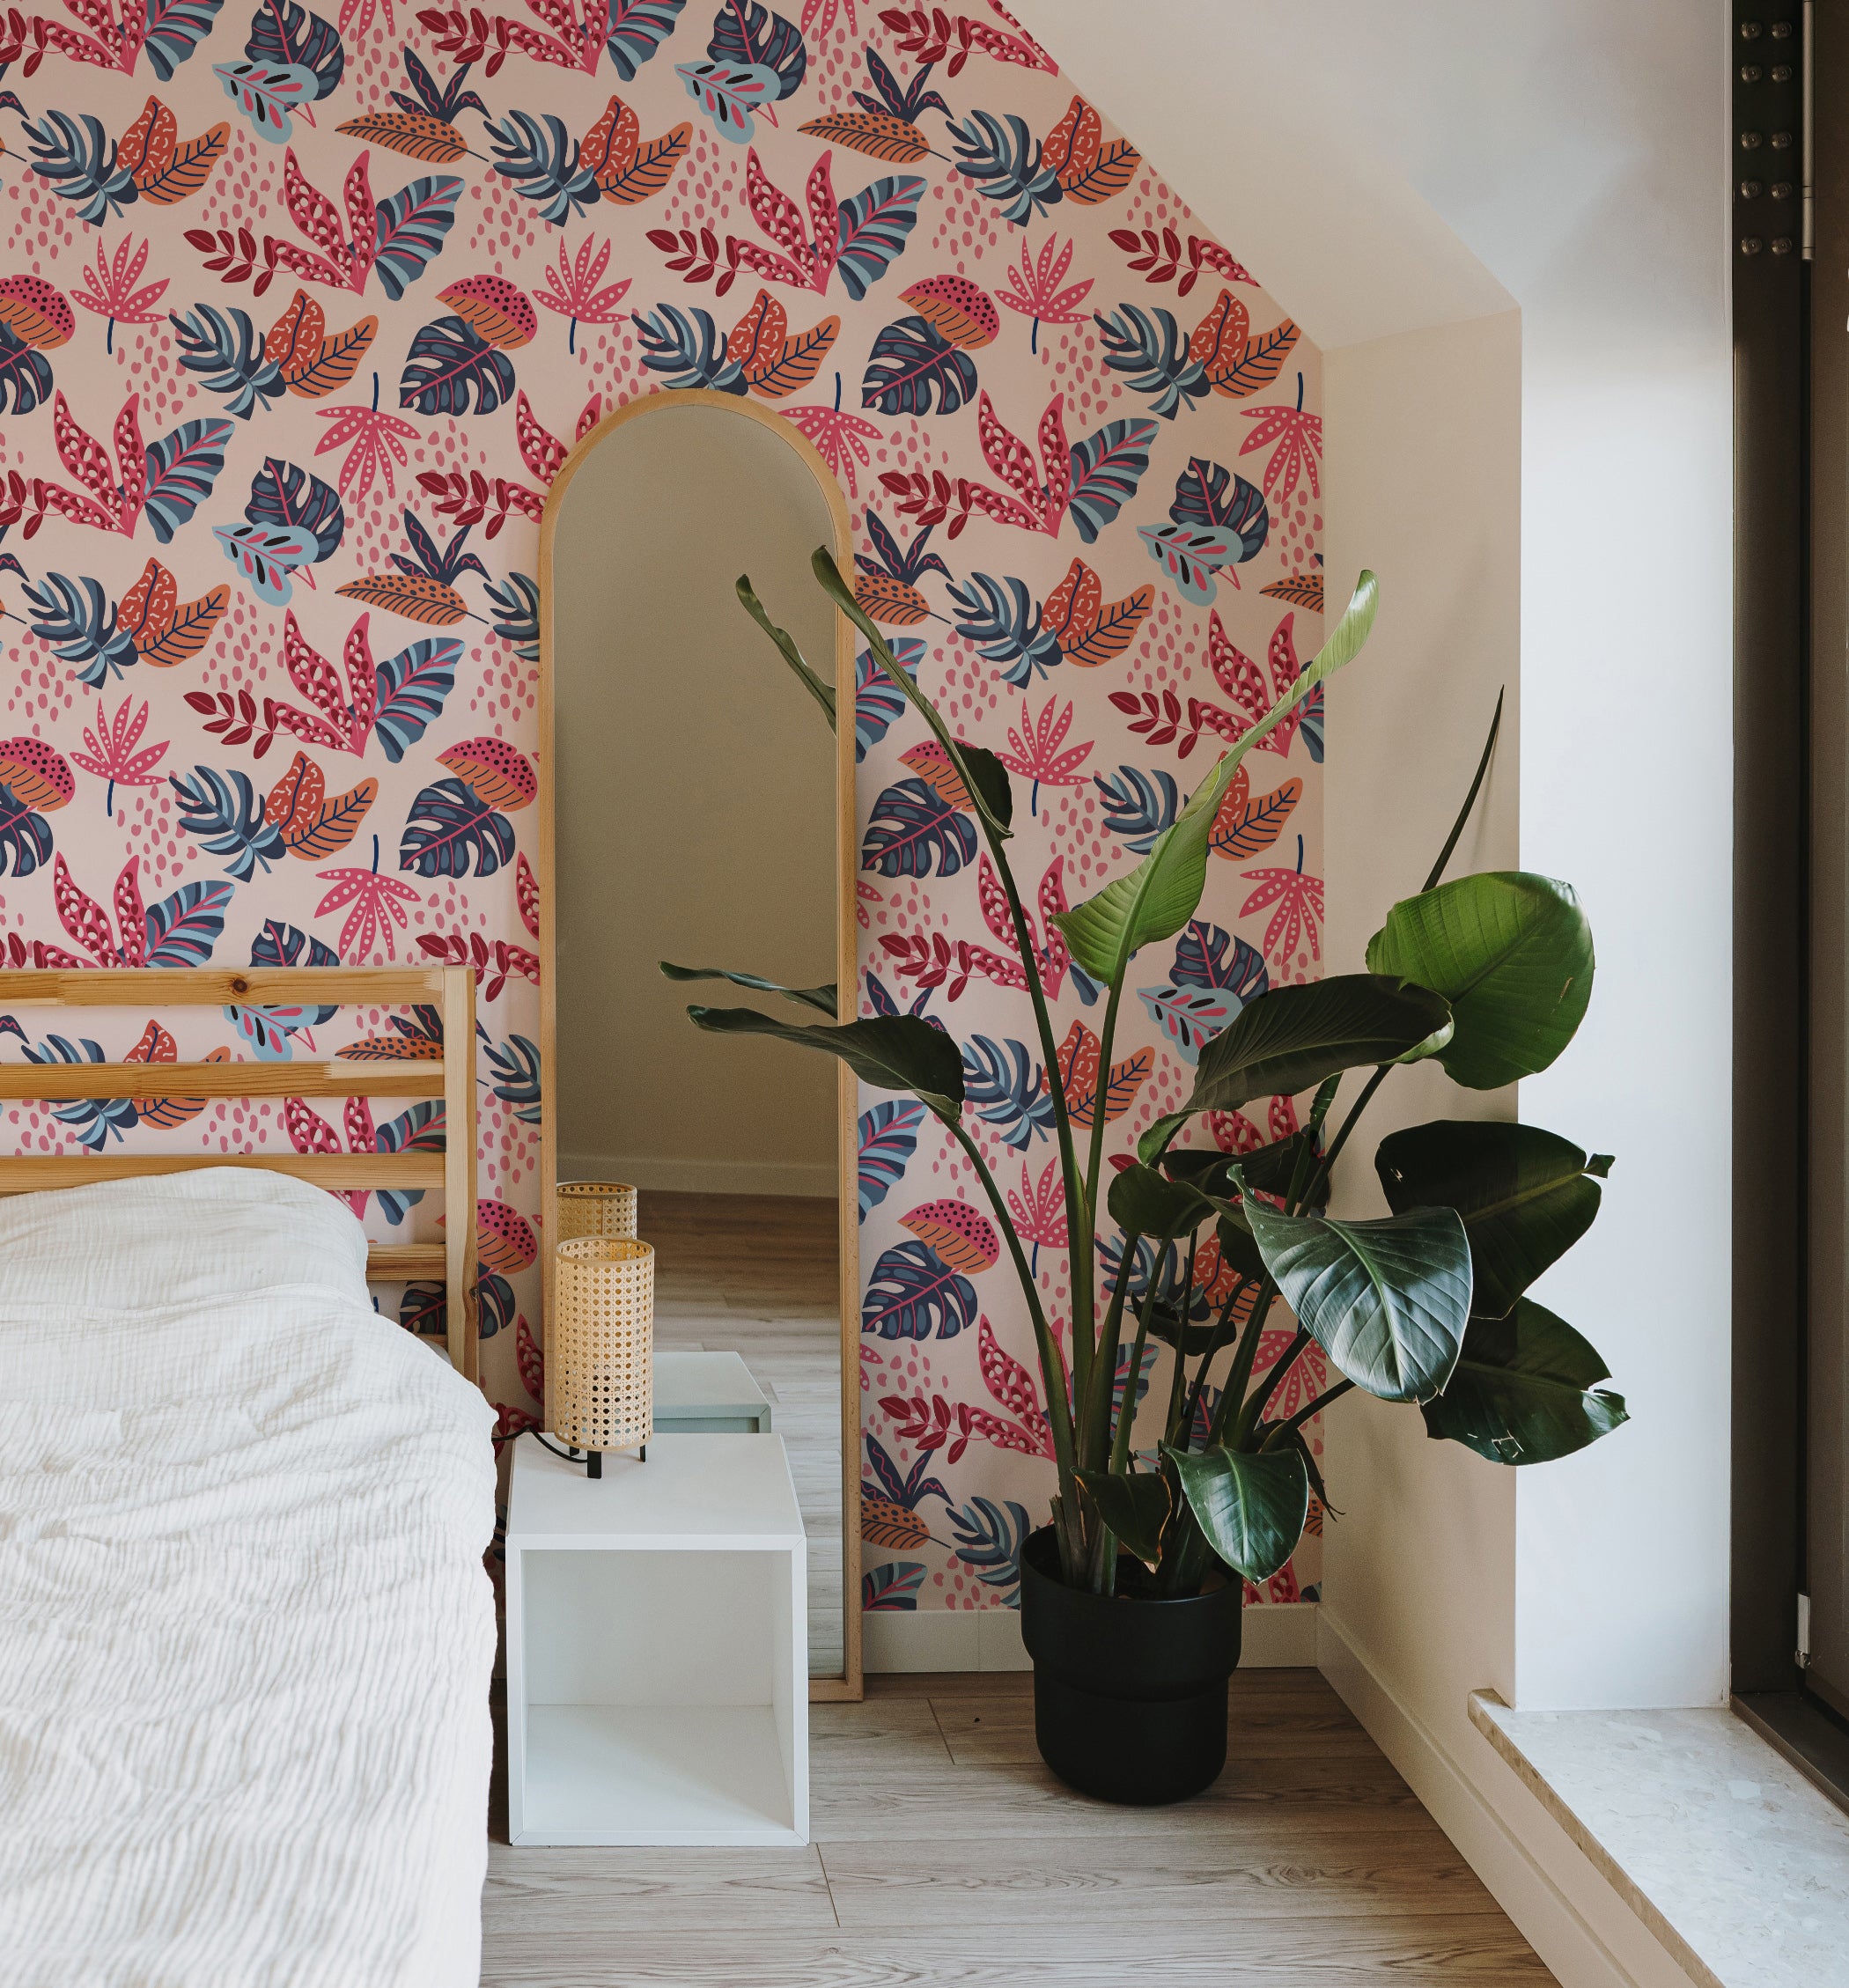 A modern bedroom decorated with Exotic Paradise wallpaper, featuring bold tropical leaves in vibrant pink, blue, and orange tones on a light beige background. The room includes a wooden bed, a tall plant, and a minimalist mirror.